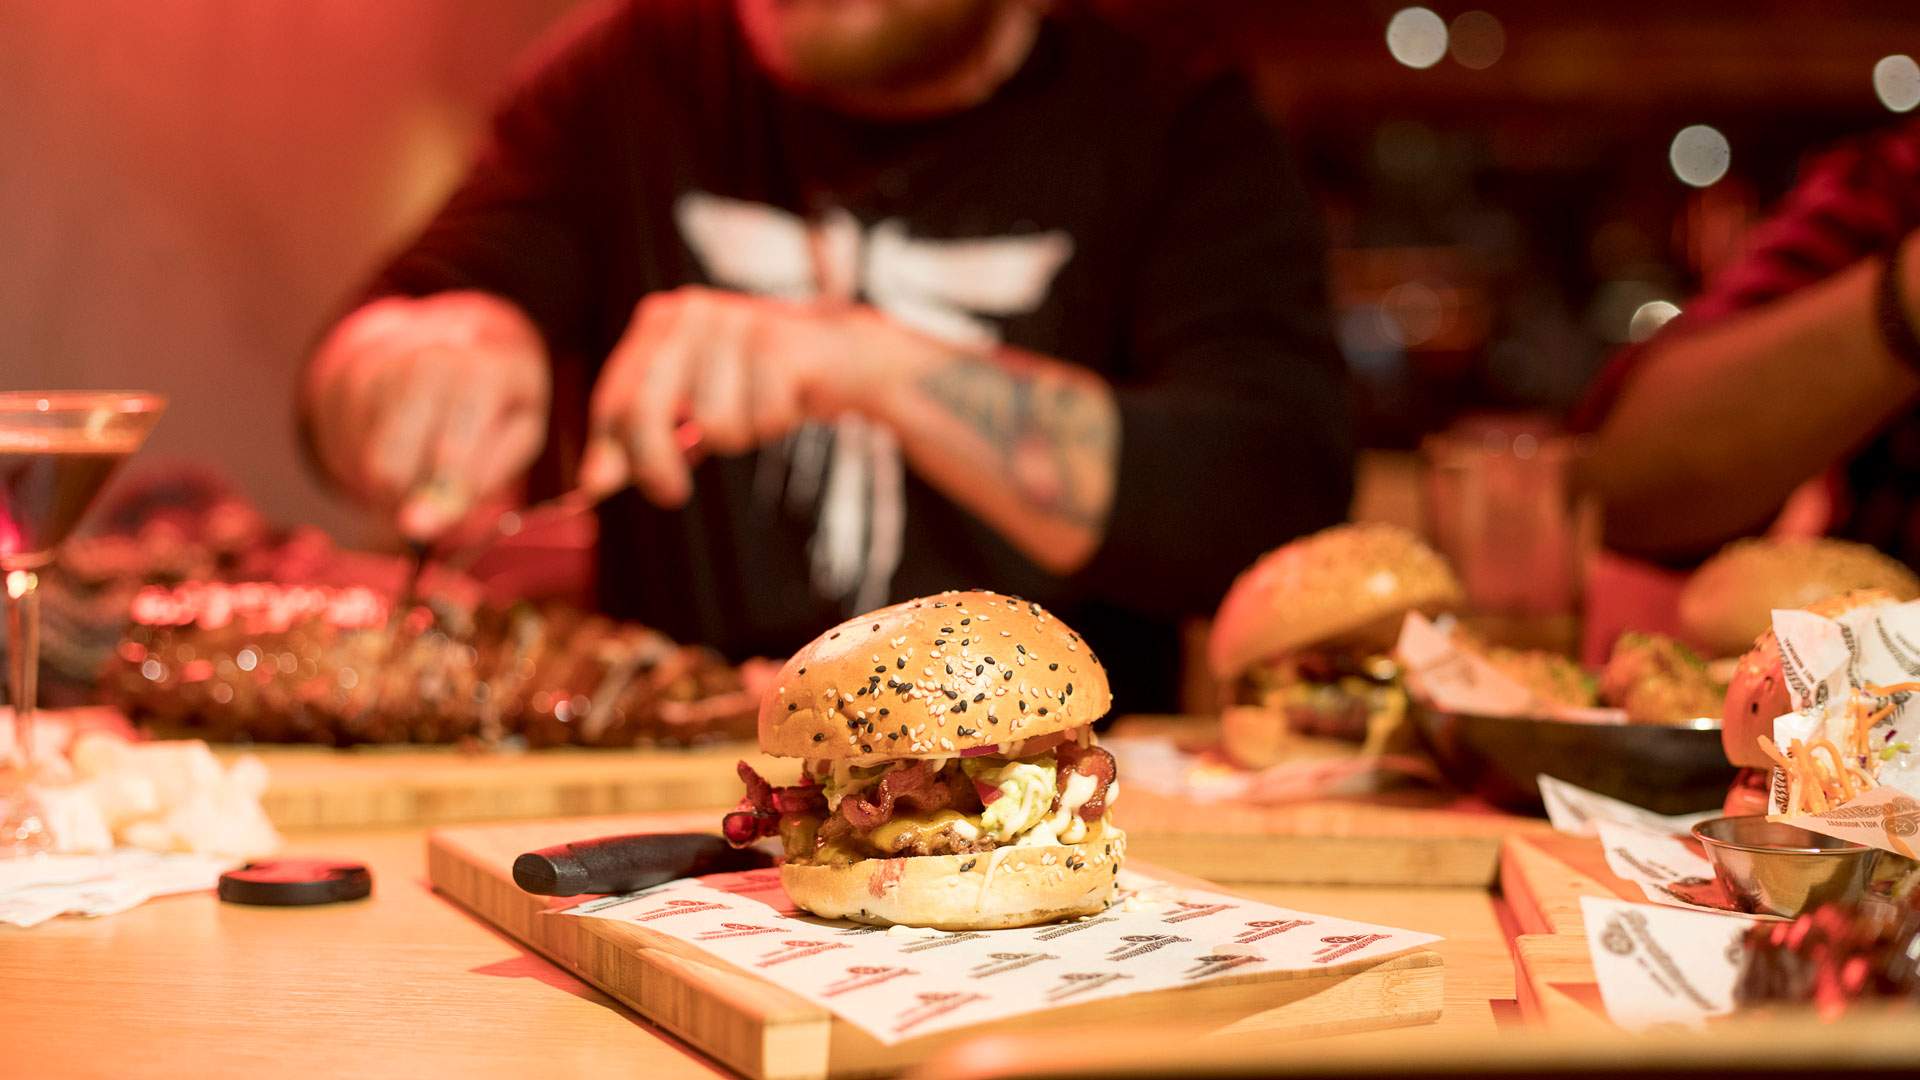 South African Burger Chain RocoMamas Has Opened Its First Australian Restaurant